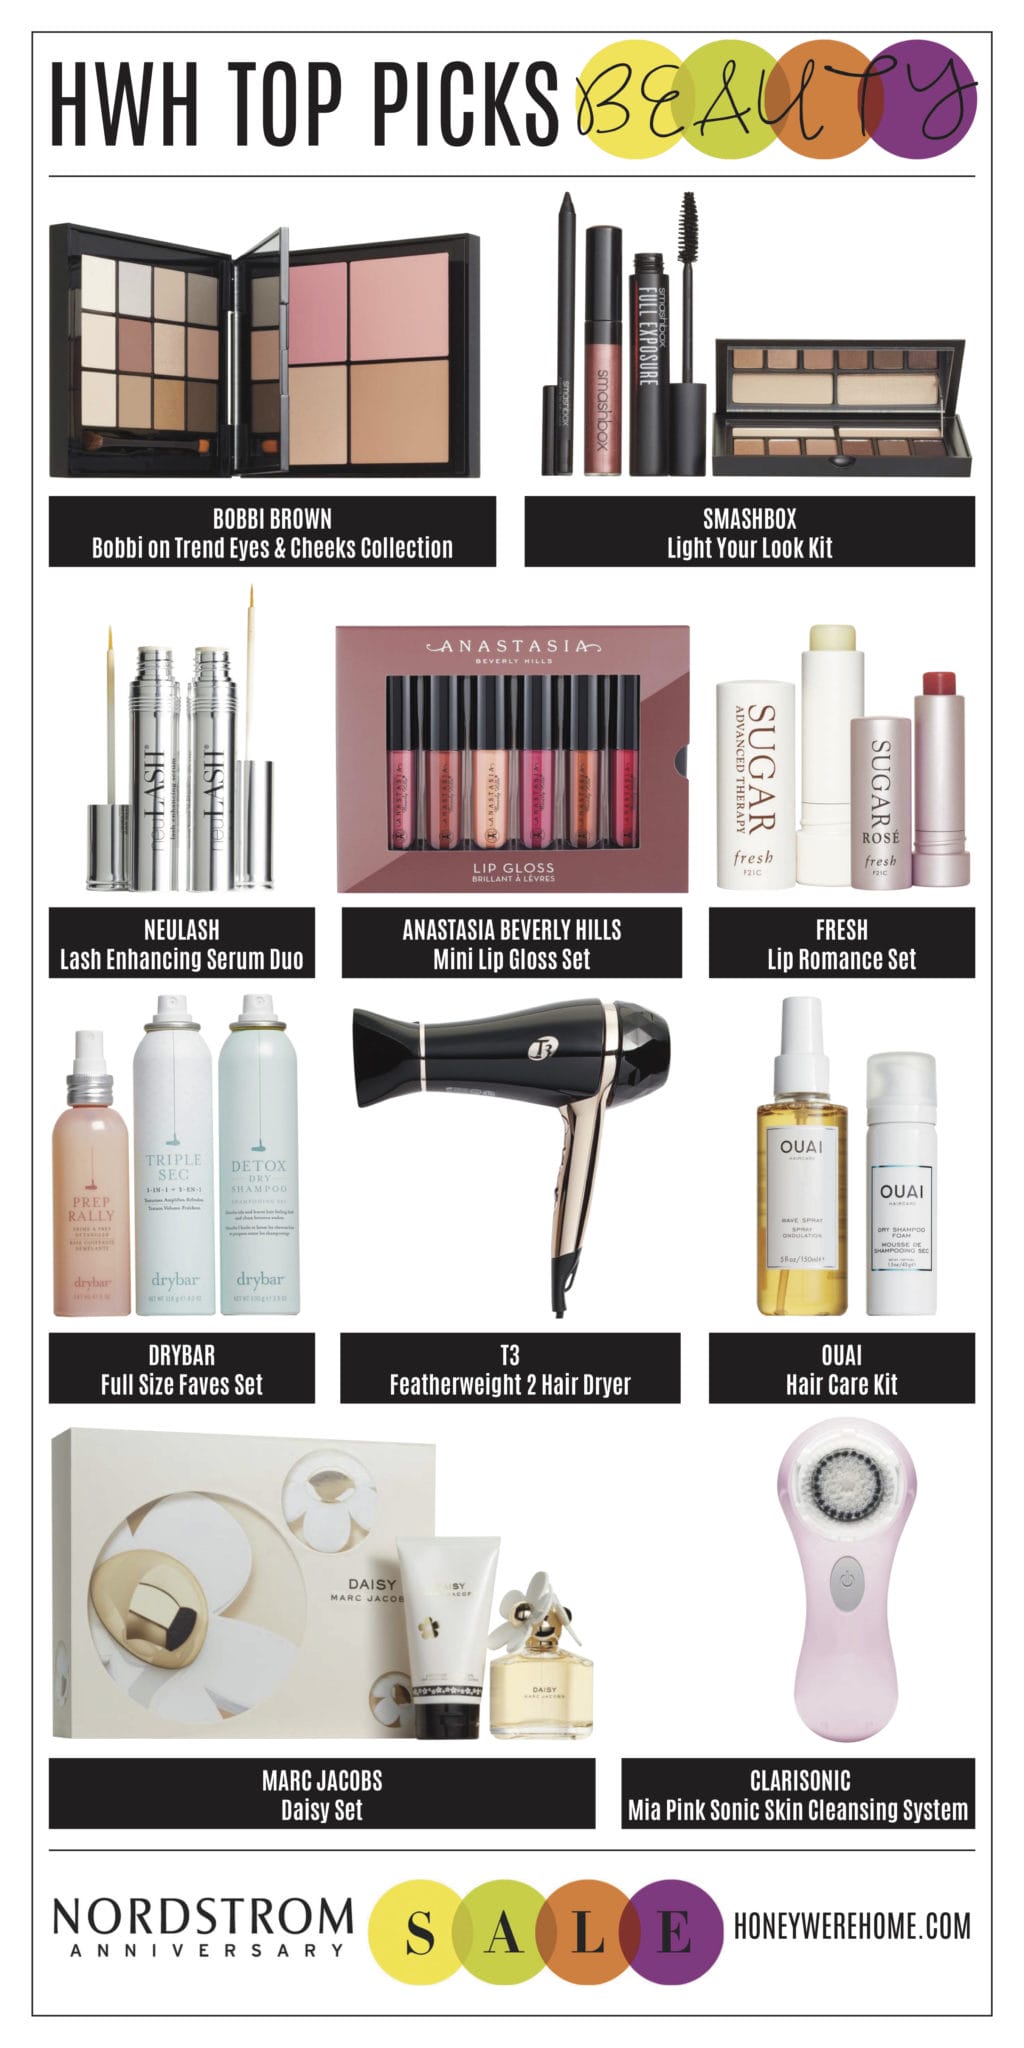 HWH Nordstrom Sale 2017, Beauty Collage 